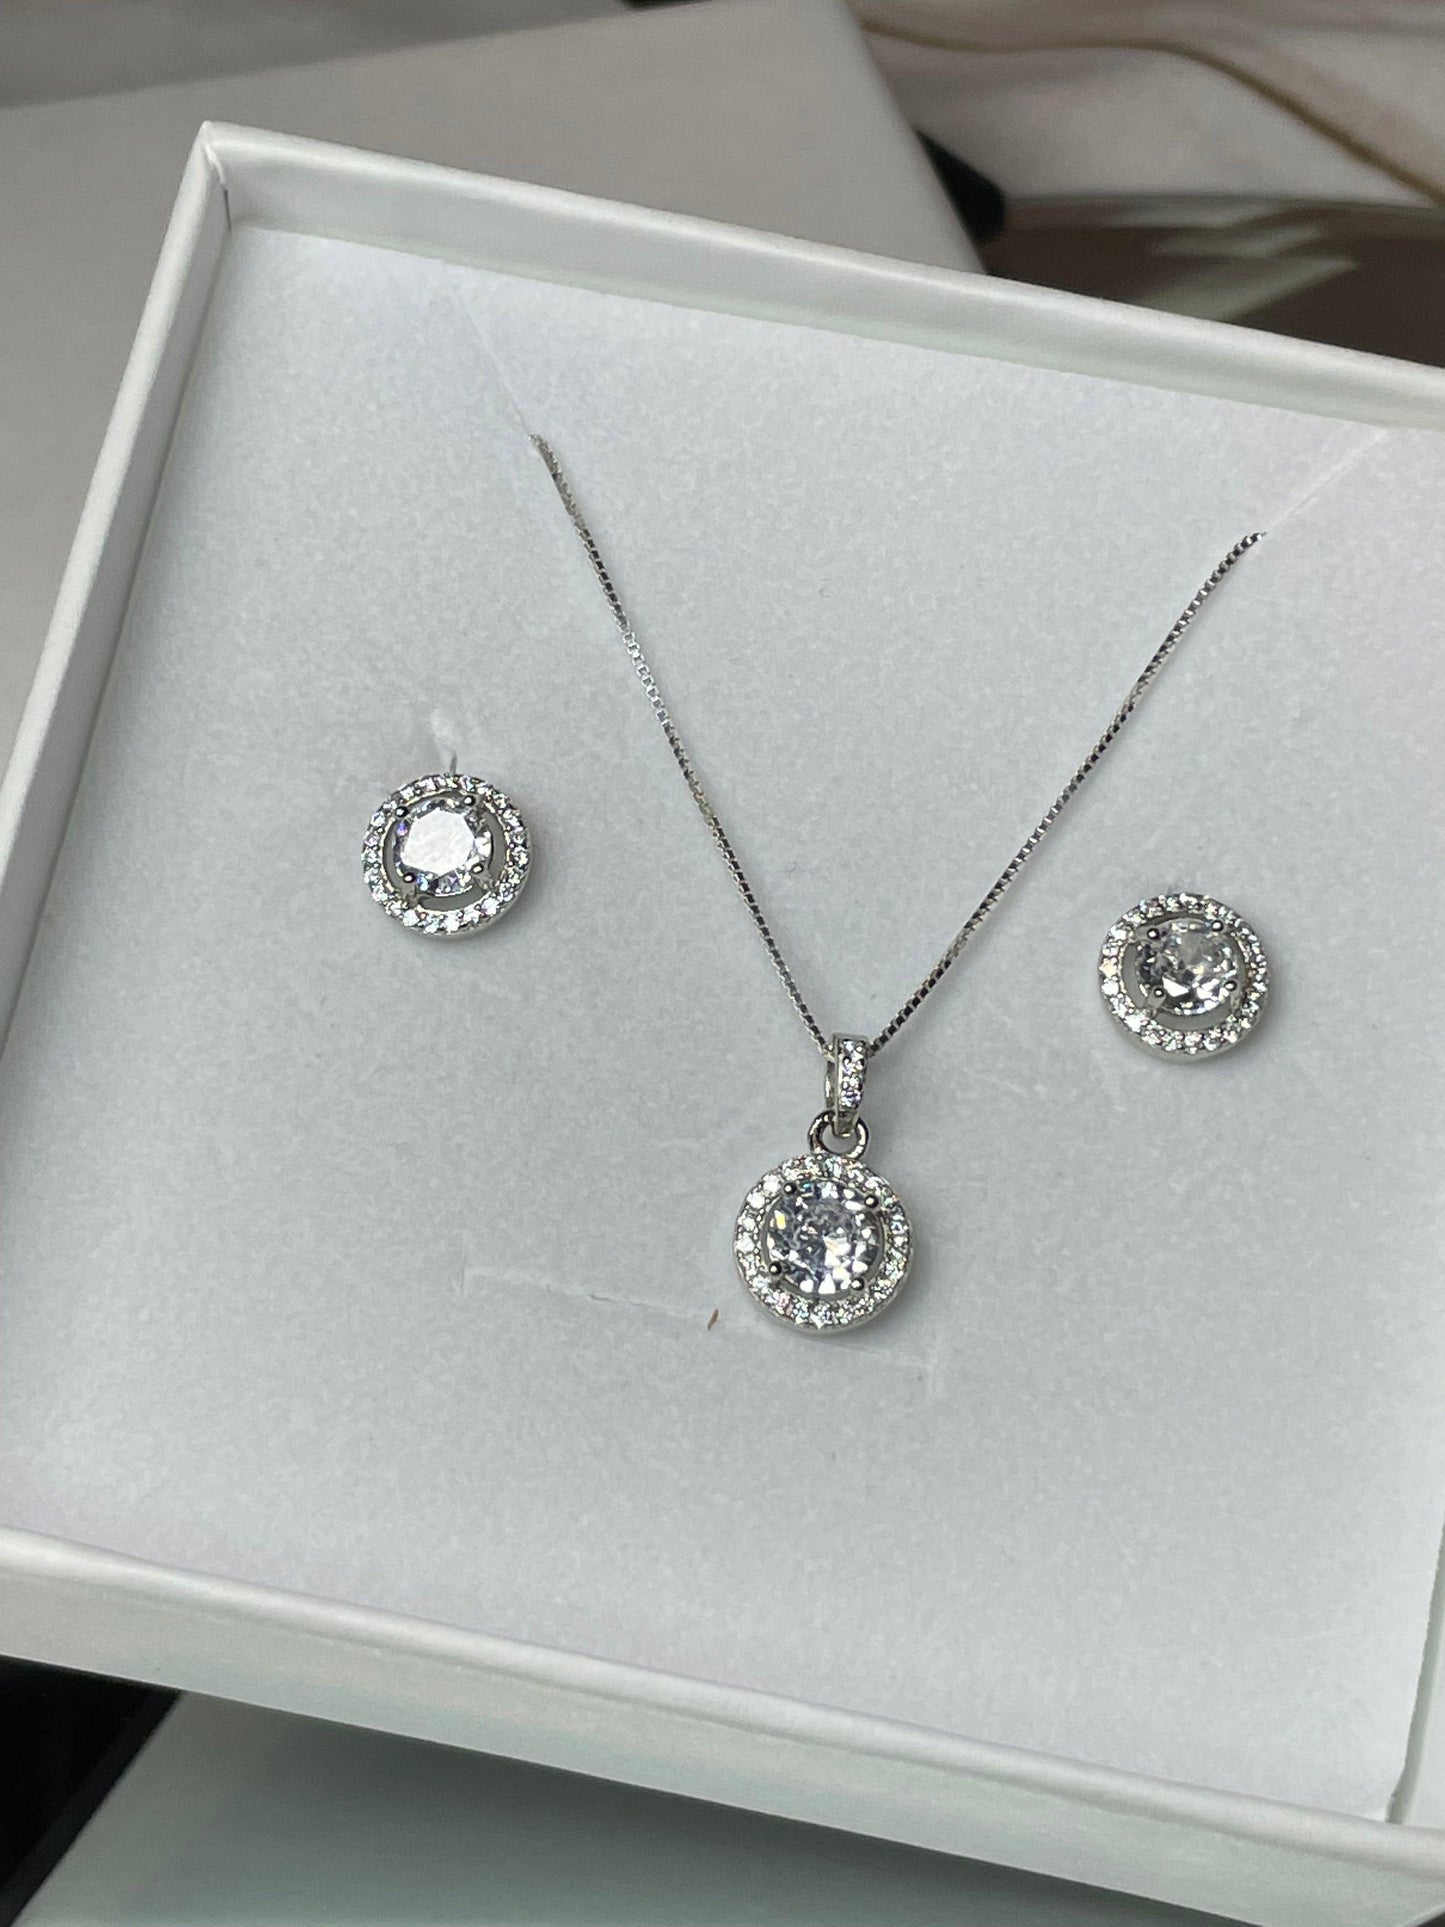 Mother's Love Halo Cut necklace and earring set